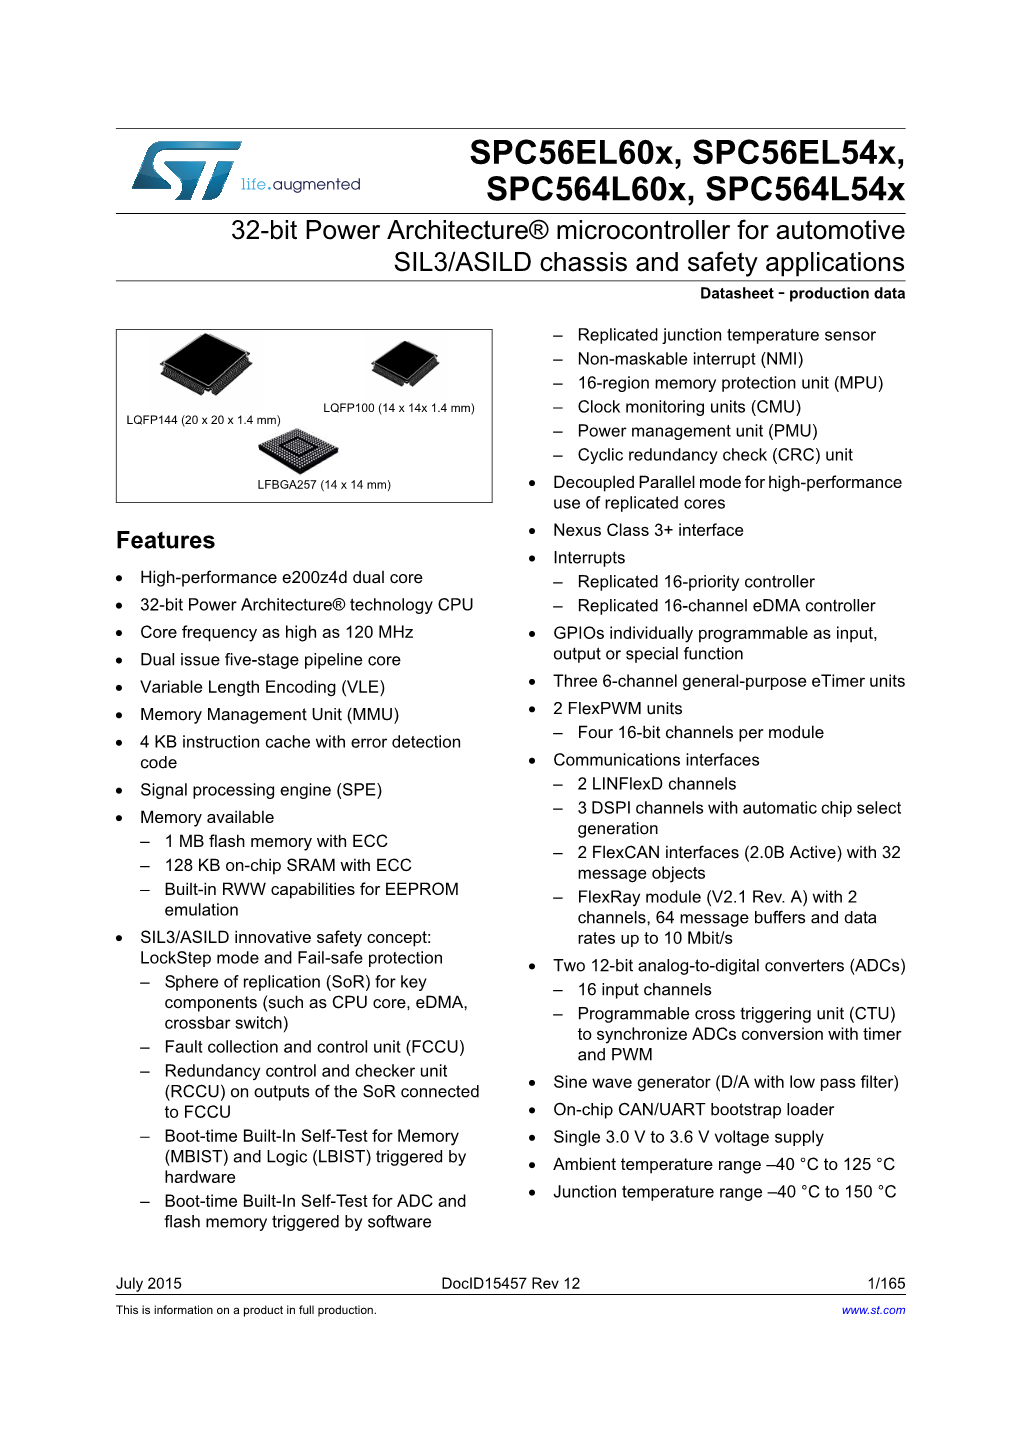 32-Bit Power Architecture® Microcontroller for Automotive SIL3/ASILD Chassis and Safety Applications Datasheet - Production Data